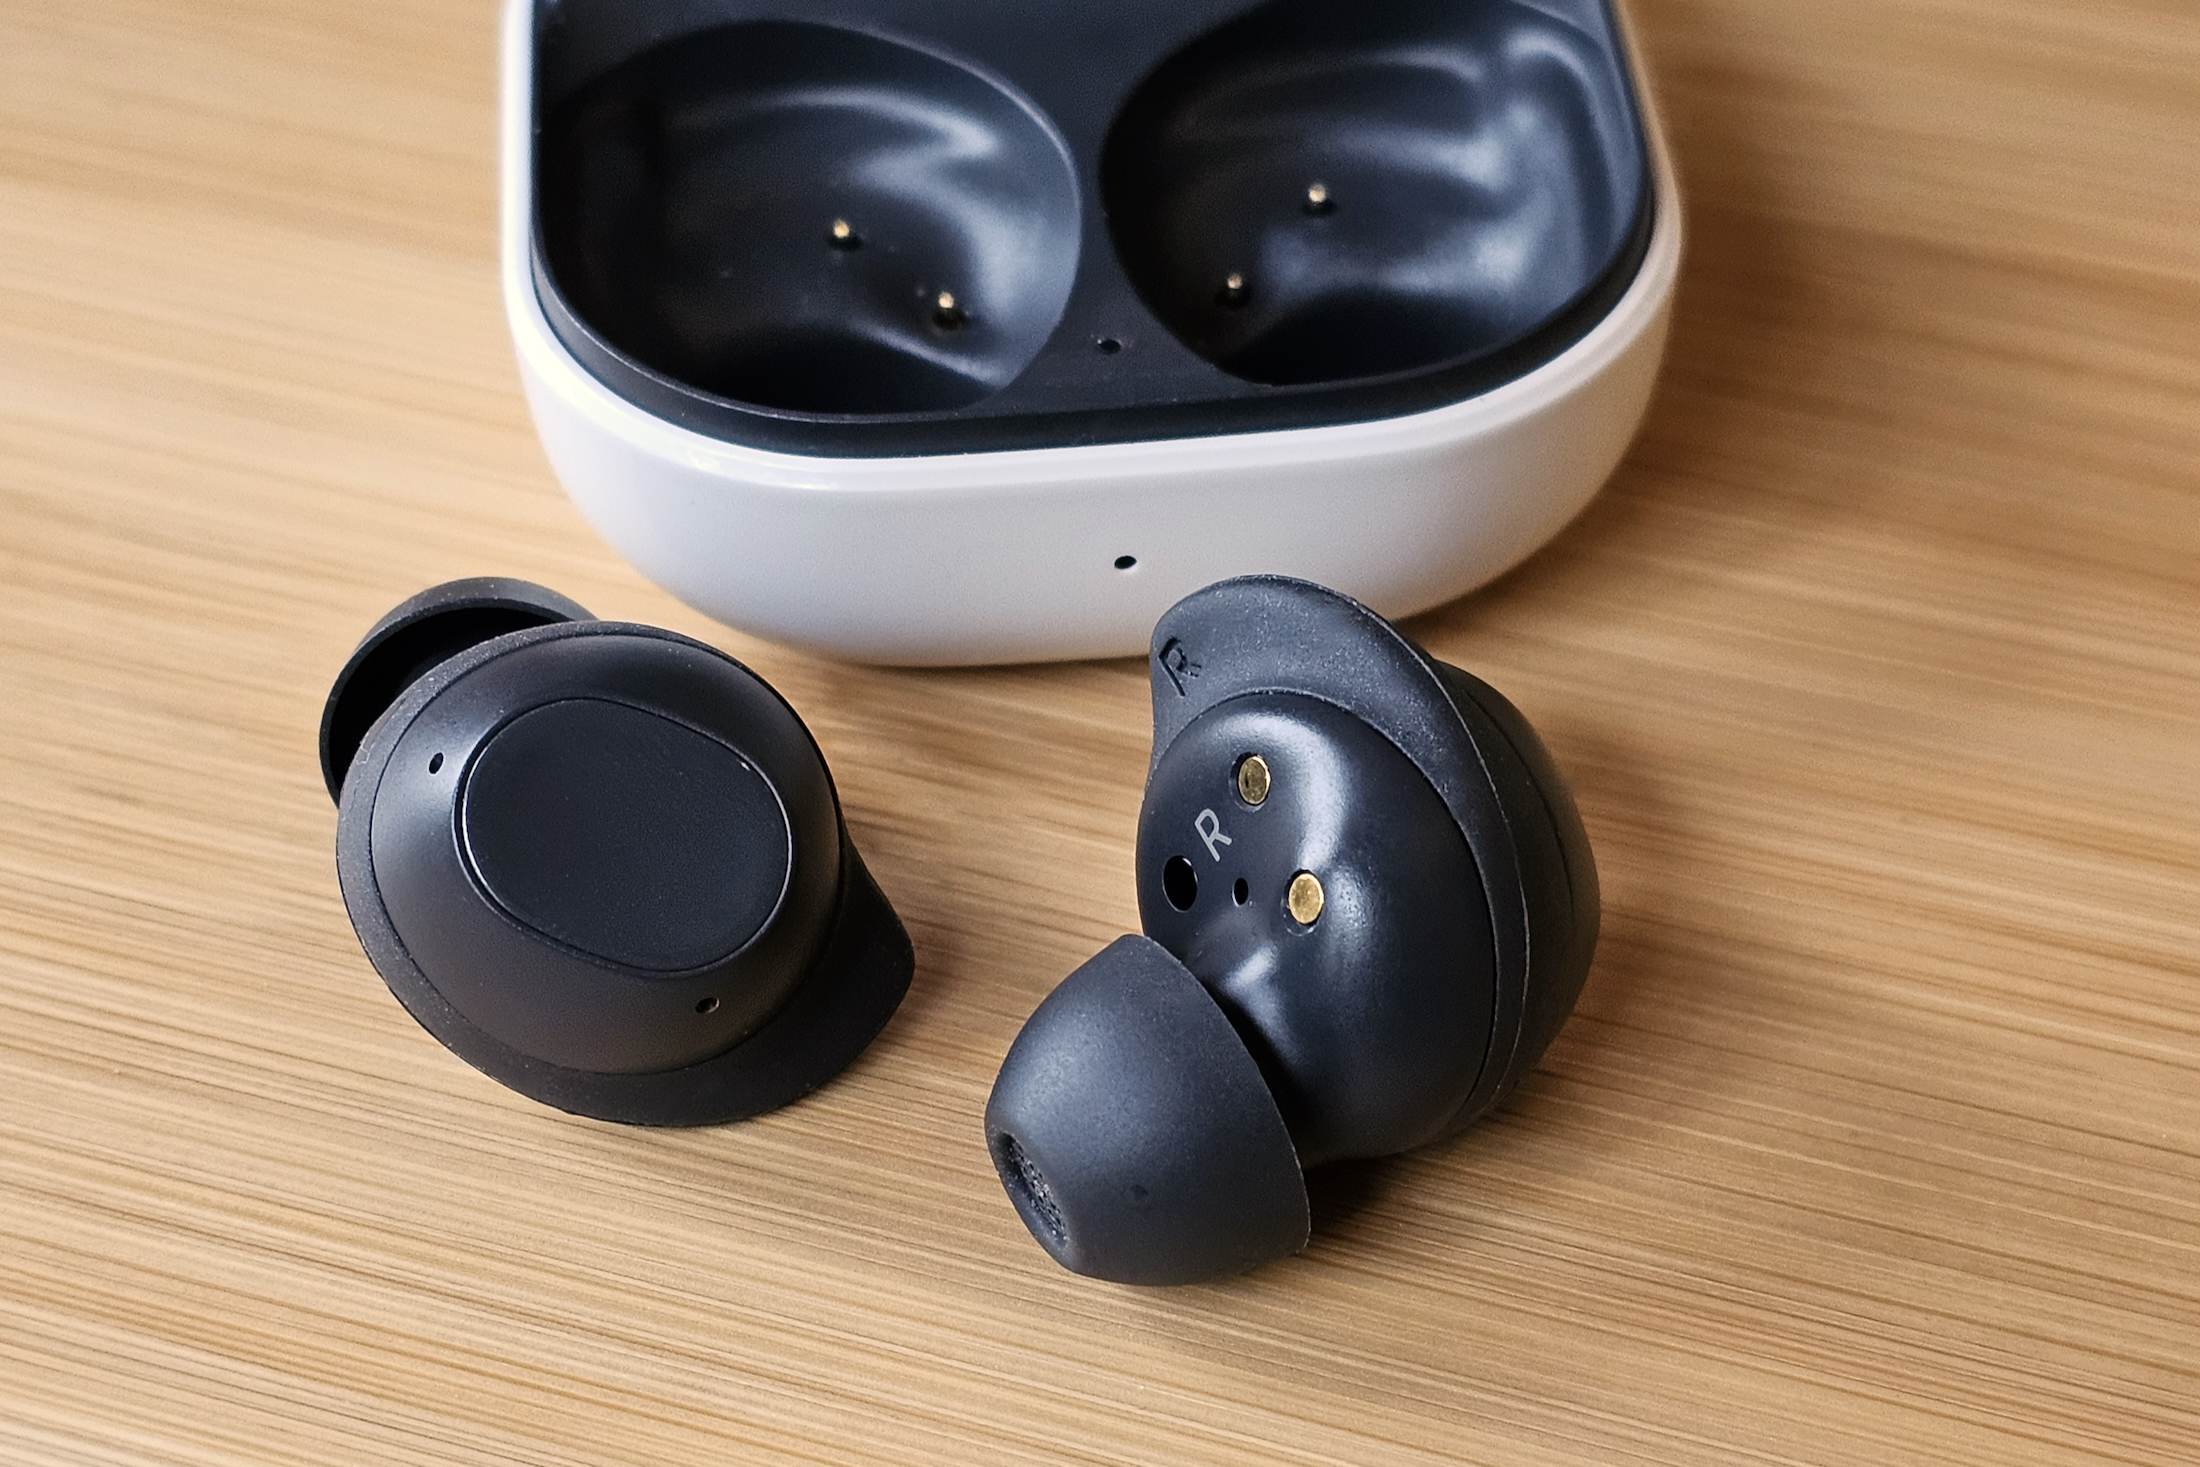 Samsung Galaxy Buds FE review: Are these $100 earbuds worth it?